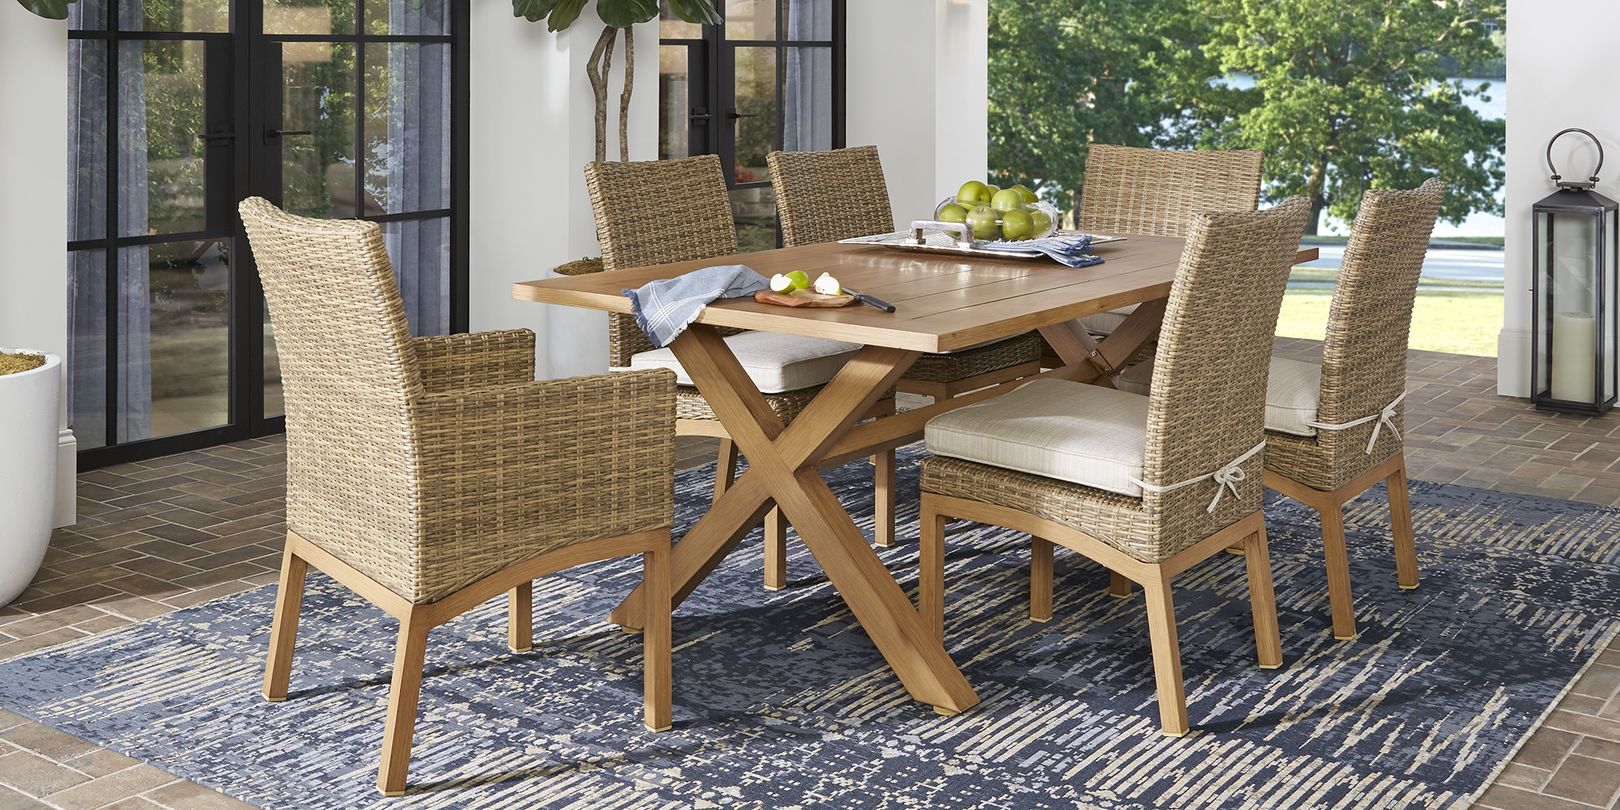 Photo of wicker and teak patio dining set with ivory cushions and blue rug